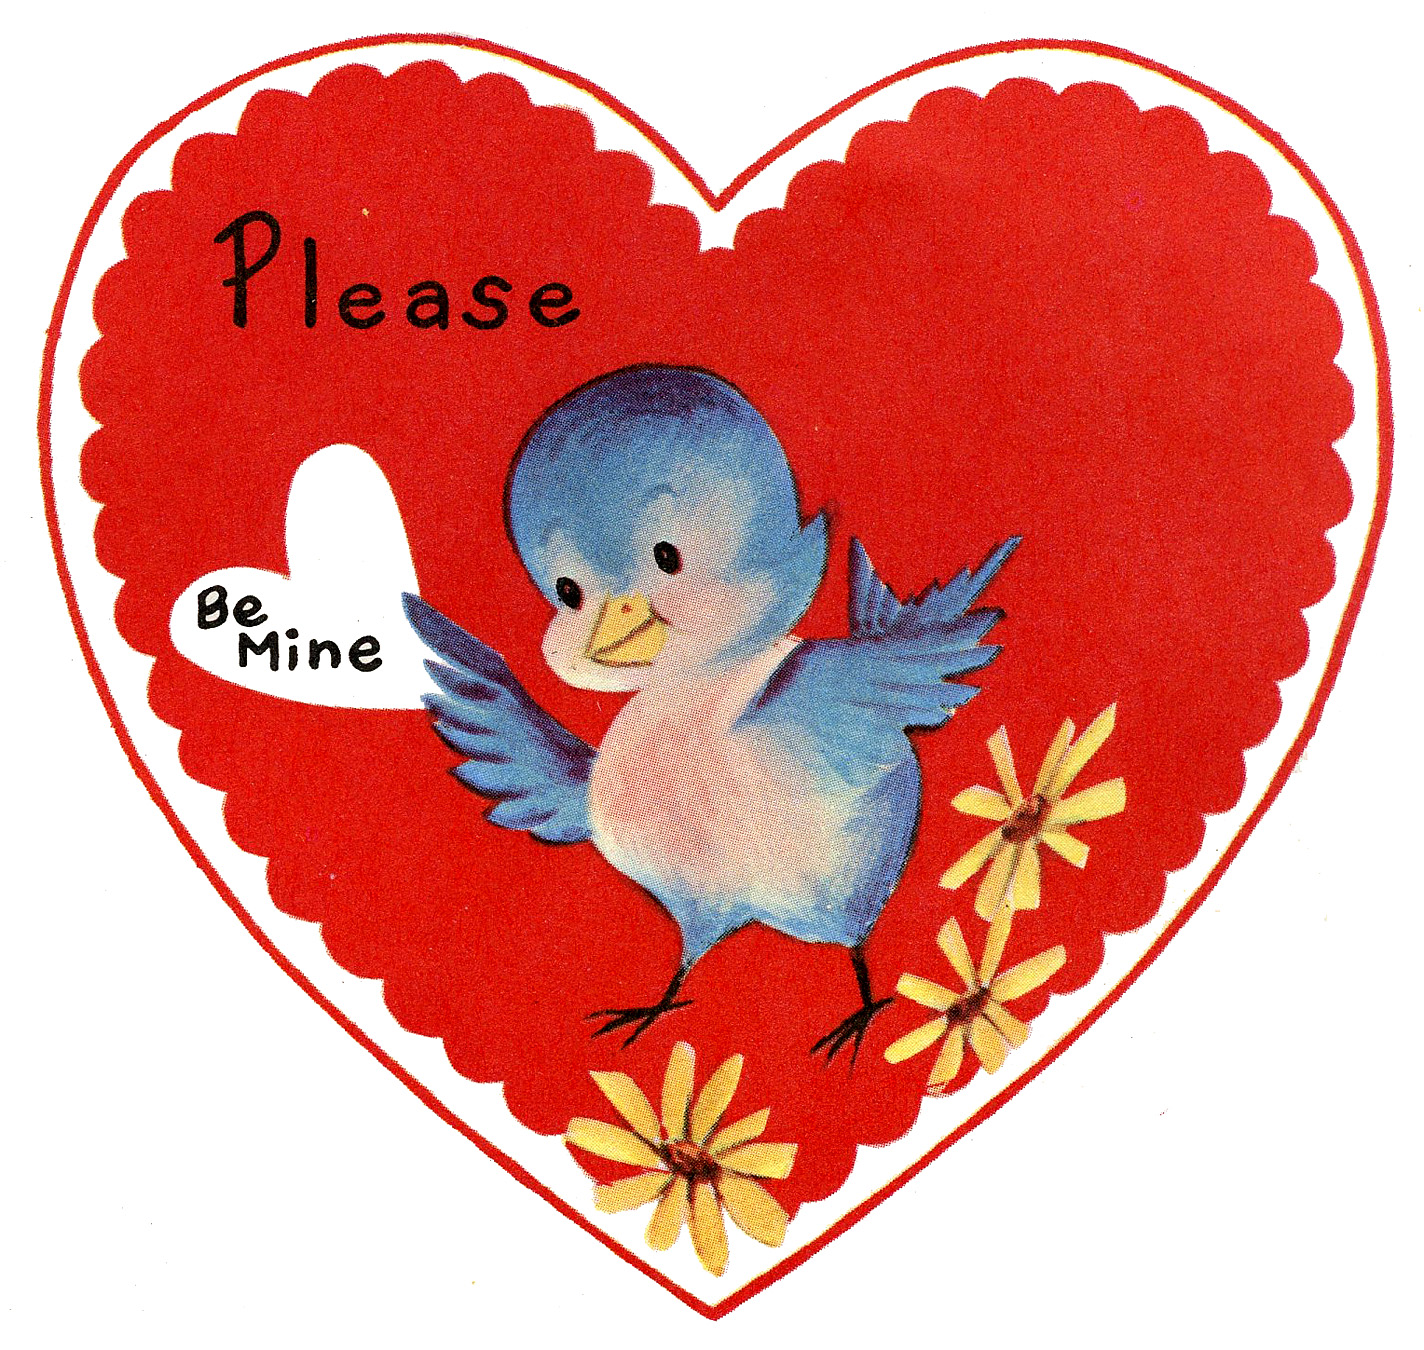 Vintage Valentines: The good, the bad, and the creepy - Pulp ...